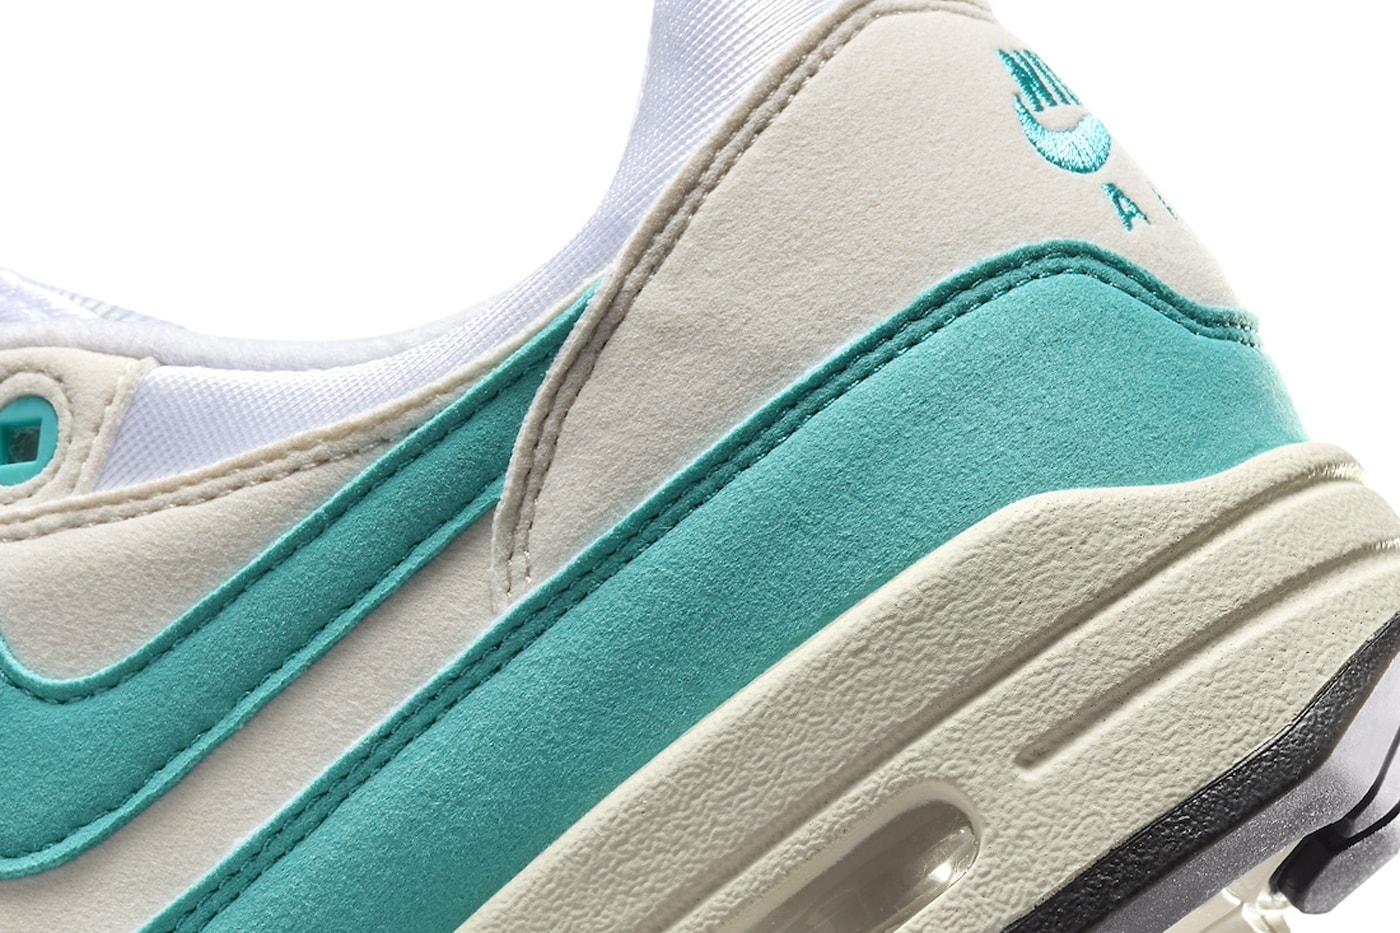 Nike Air Max 1 Dusty Cactus DZ2628-107 Release Info